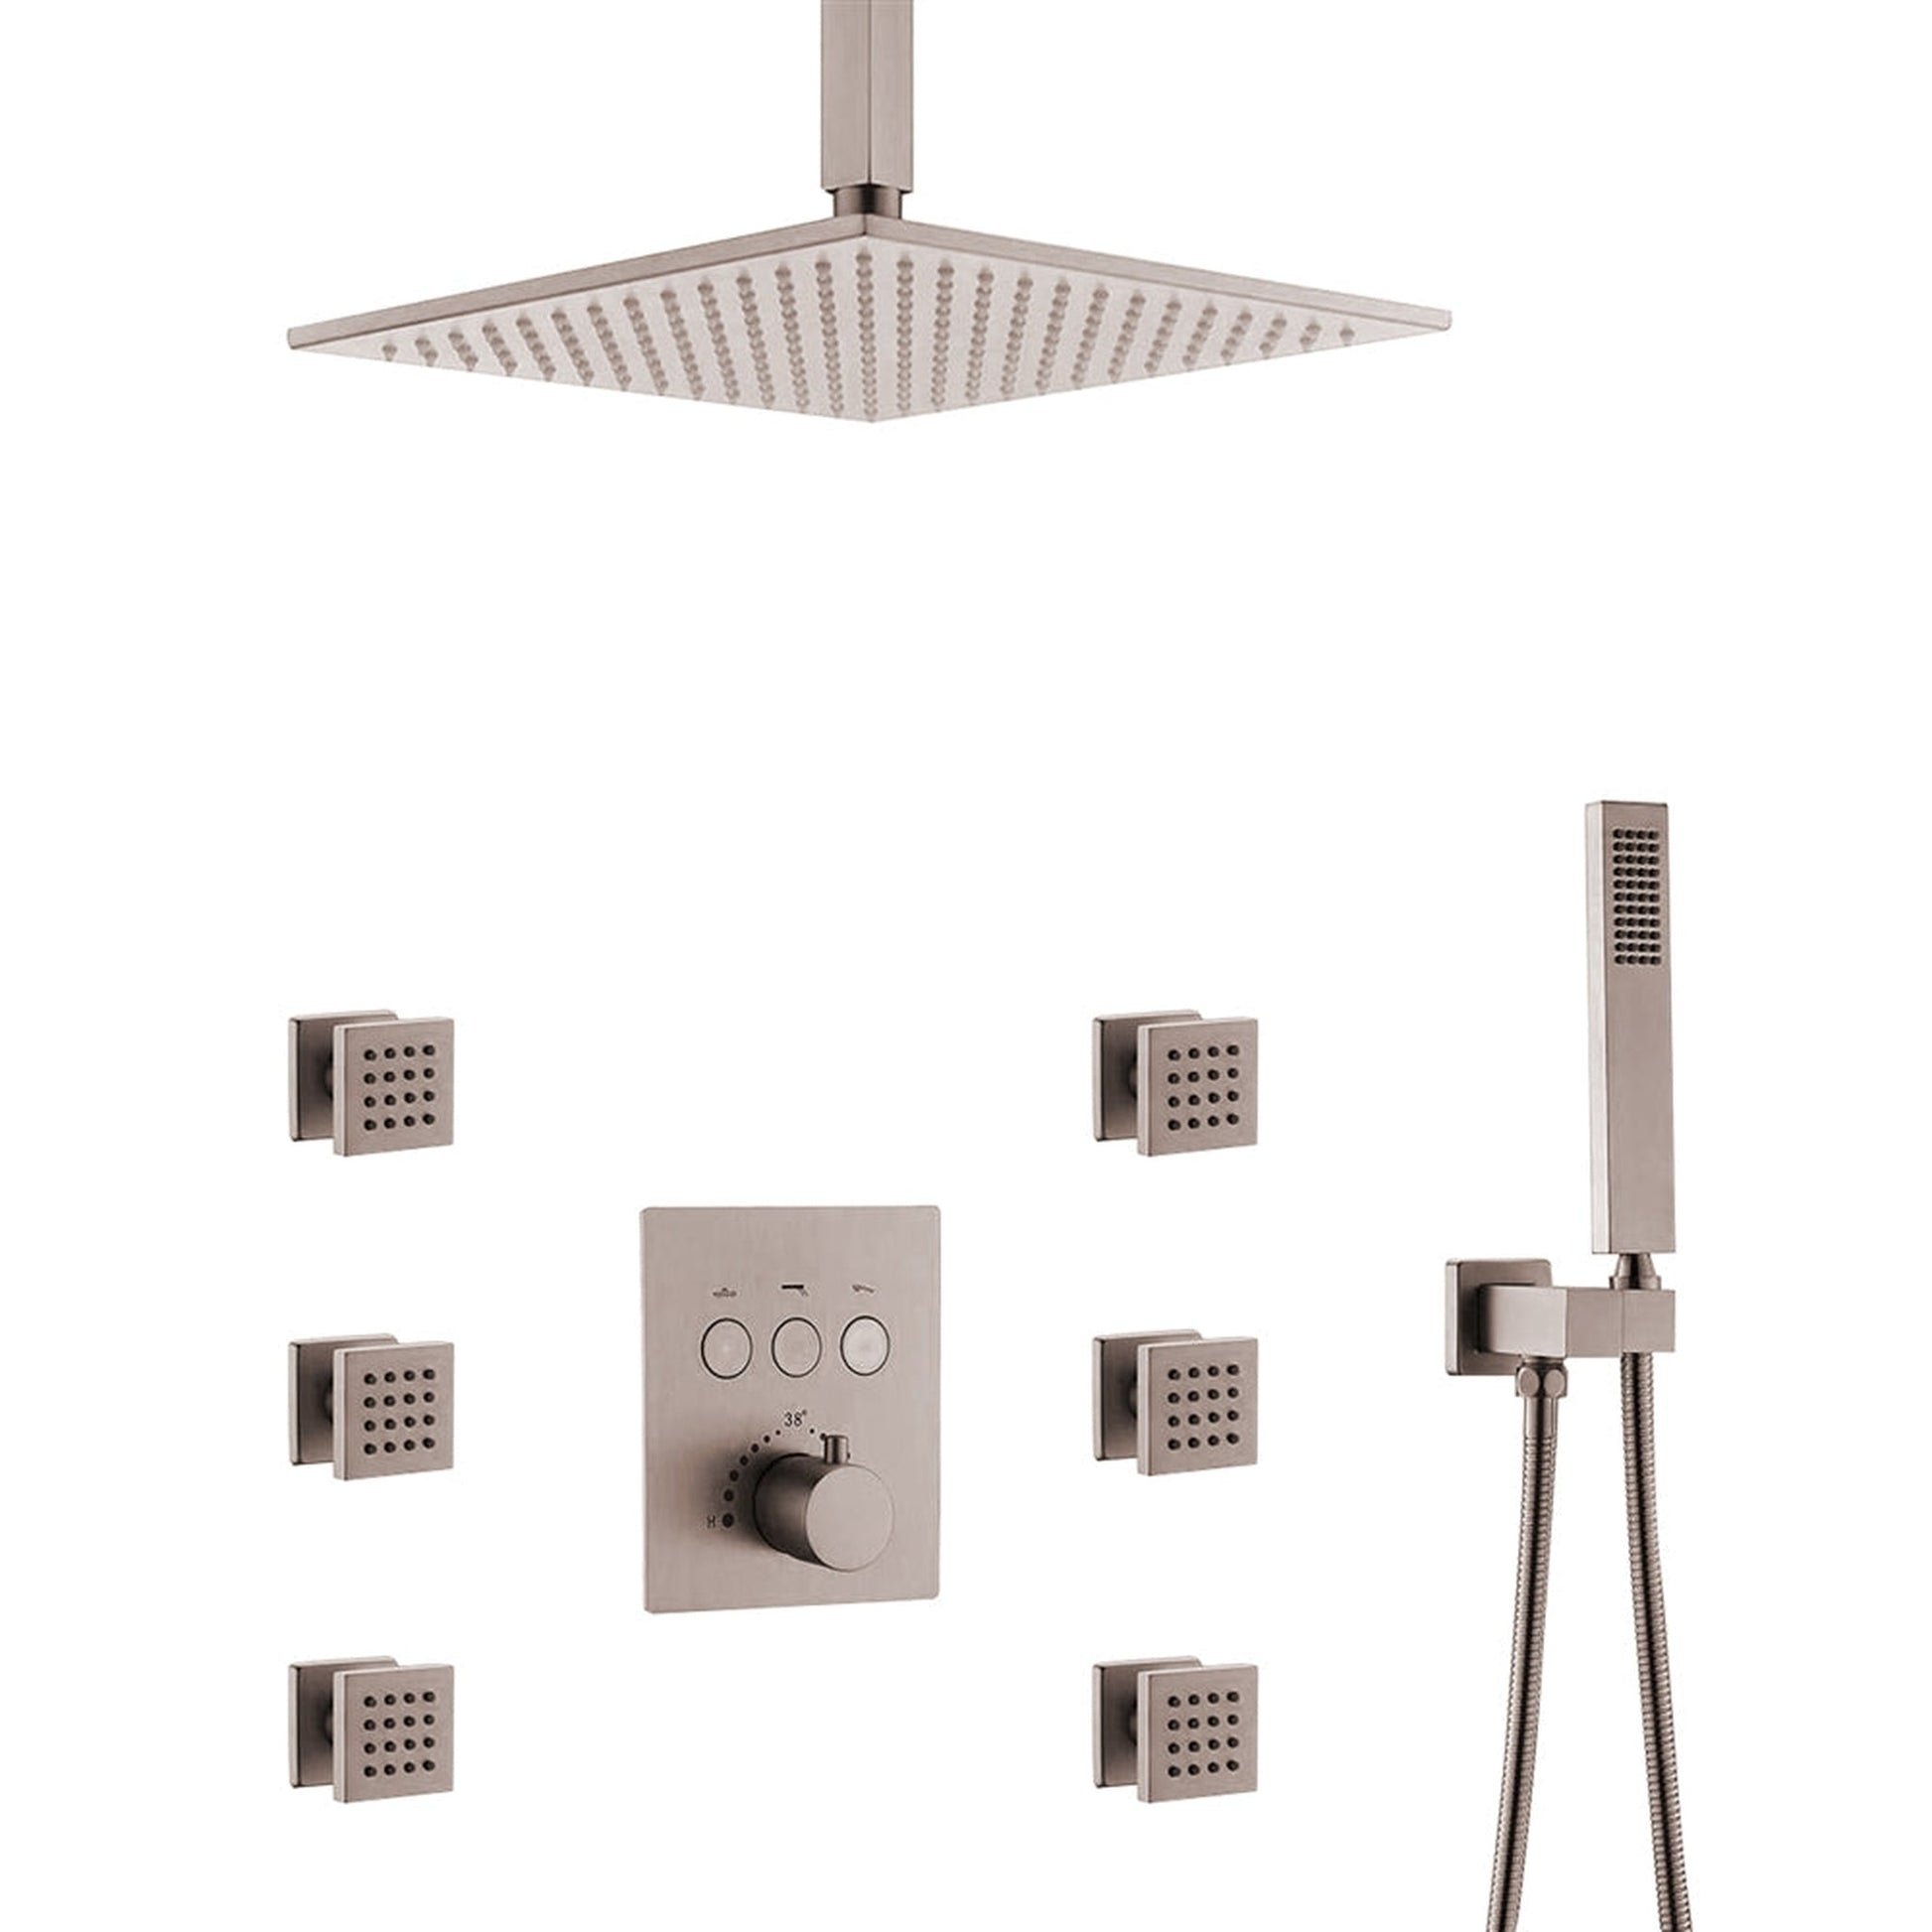 Fontana 8" Brushed Nickel Square Ceiling Mounted Rainfall Thermostat Mixer Shower System With 4-Jet Sprays and Hand Shower